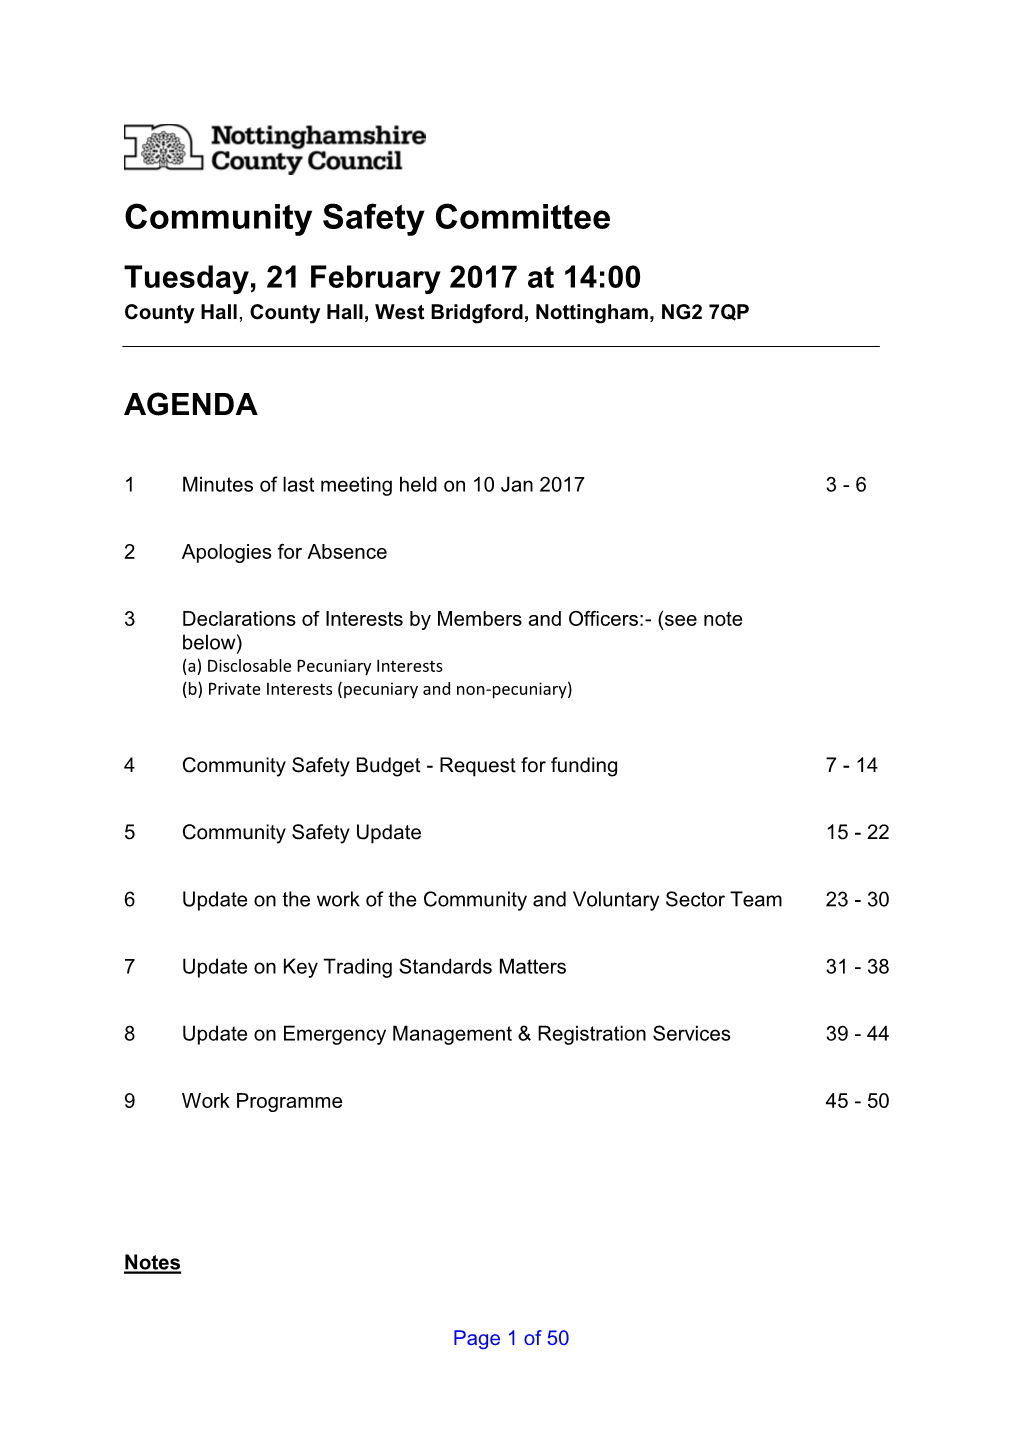 Community Safety Committee Tuesday, 21 February 2017 at 14:00 County Hall, County Hall, West Bridgford, Nottingham, NG2 7QP